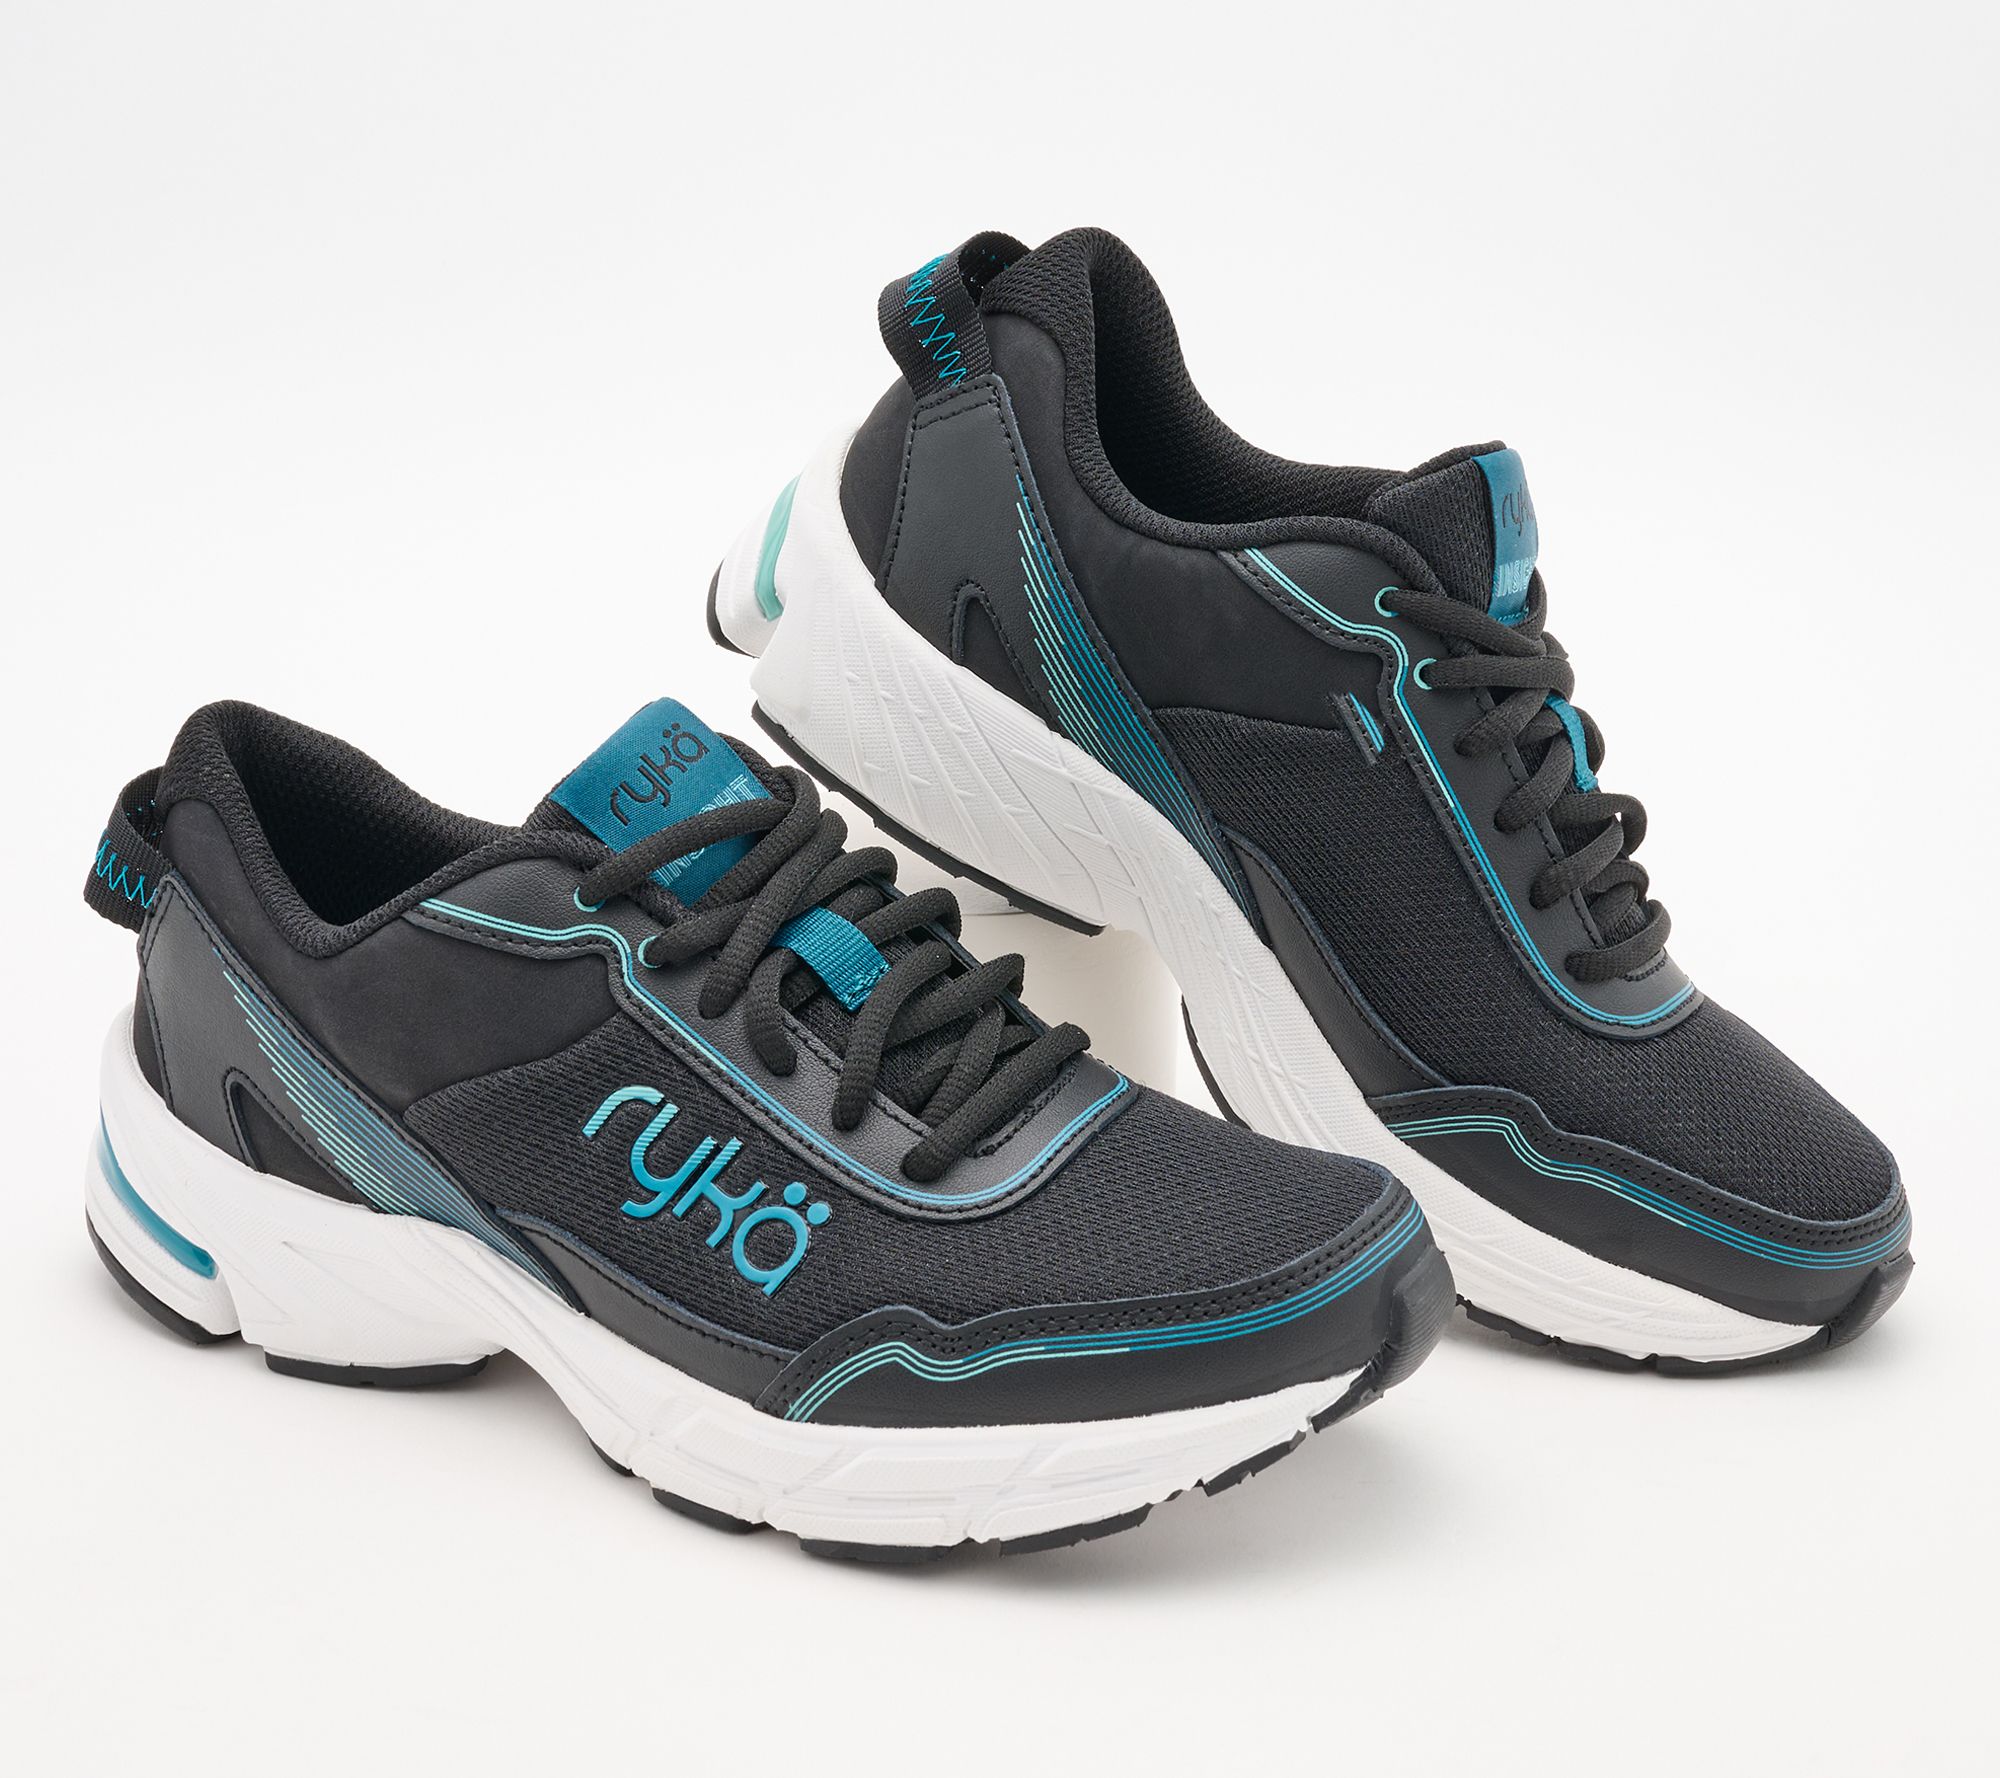 Ryka Walking Shoes for Fitness